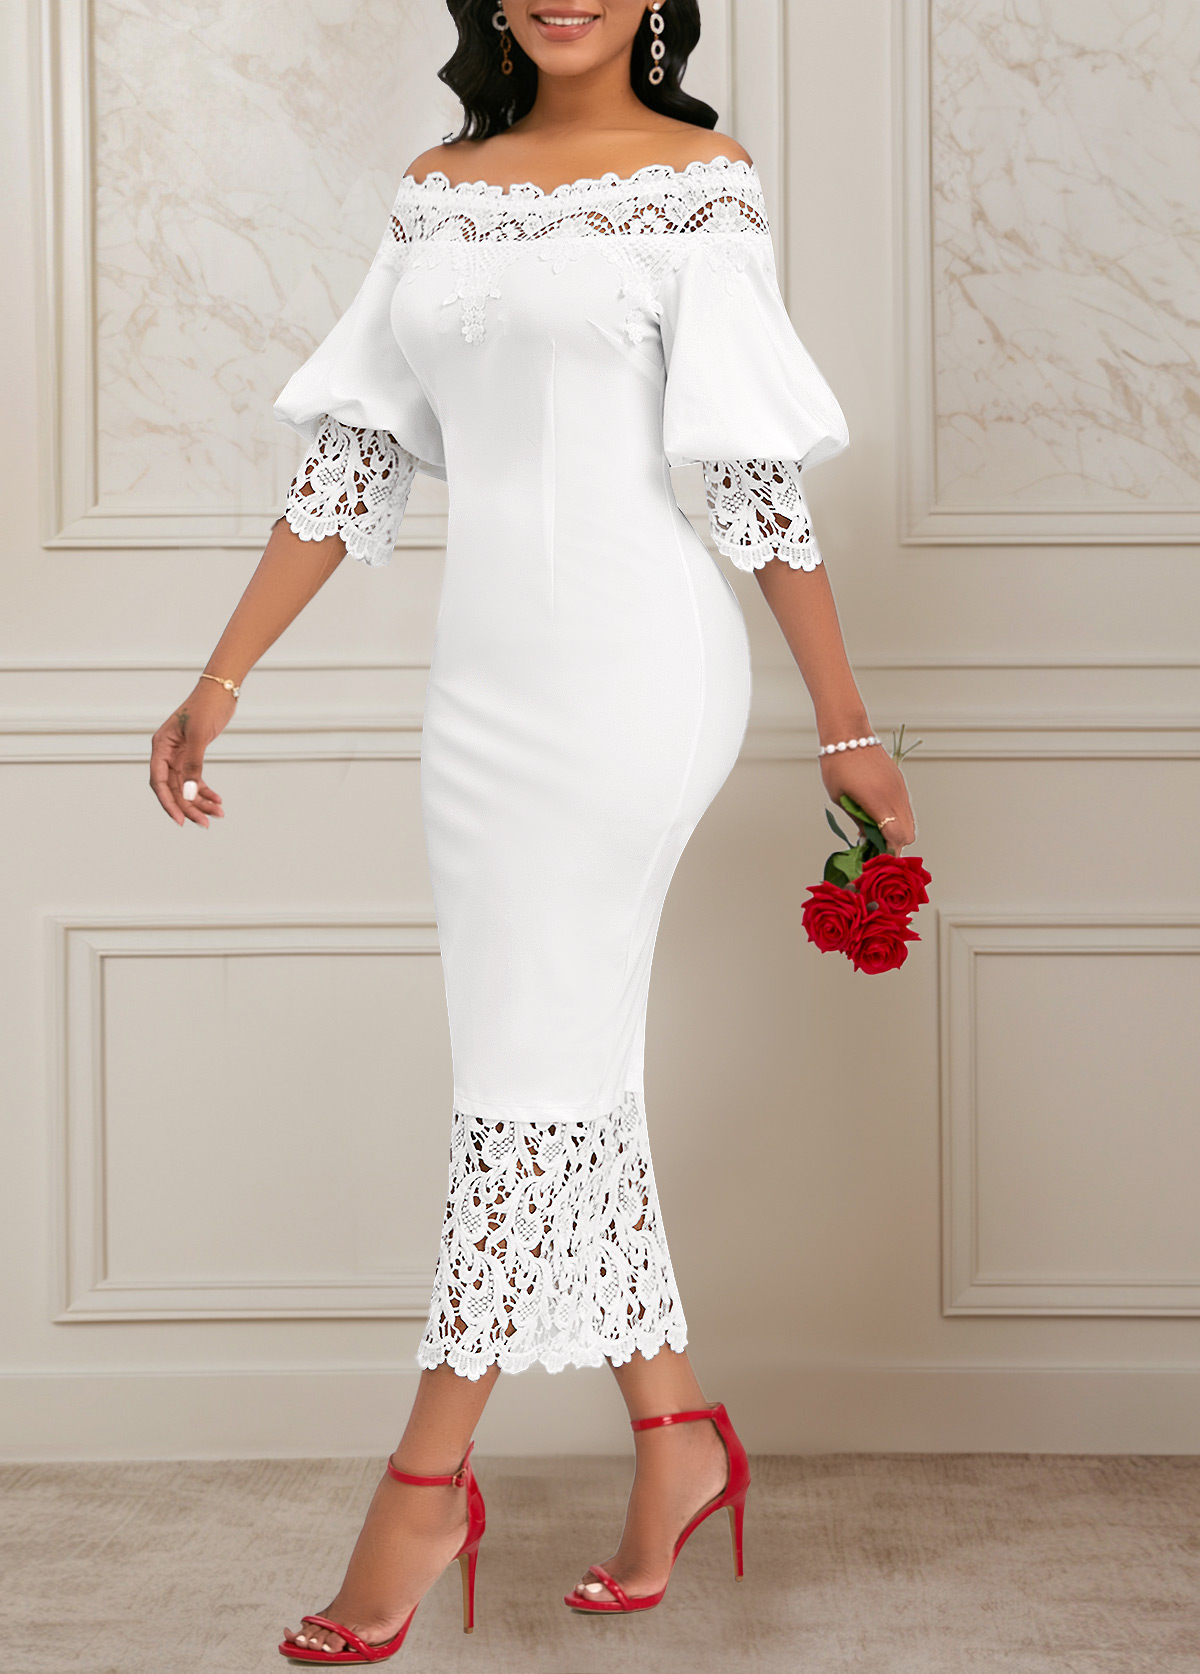 Lace Raw White 3/4 Sleeve Off Shoulder Bodycon Dress